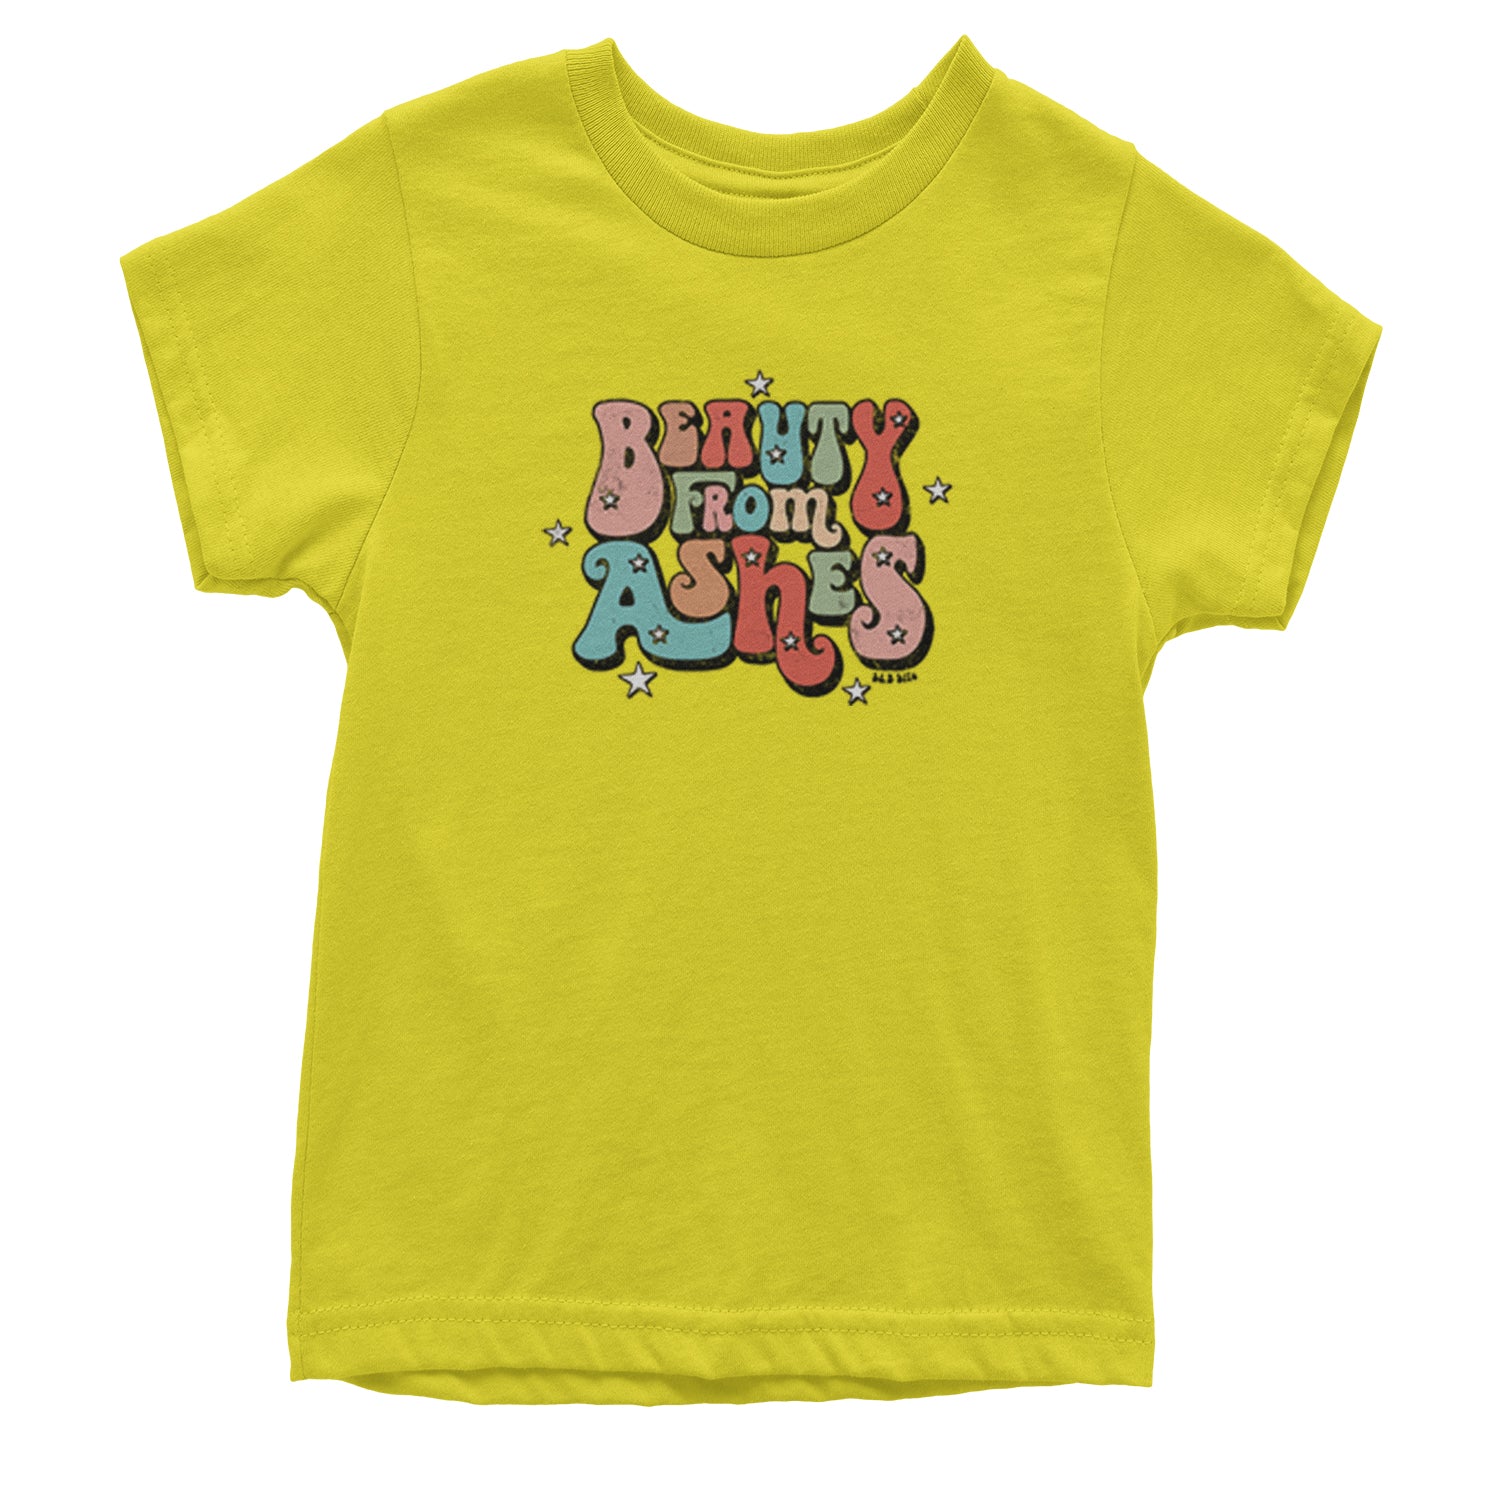 Beauty From Ashes Youth T-shirt